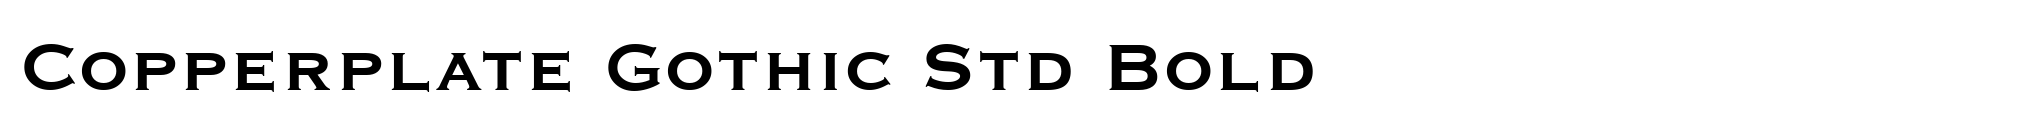 Copperplate Gothic Std Bold image